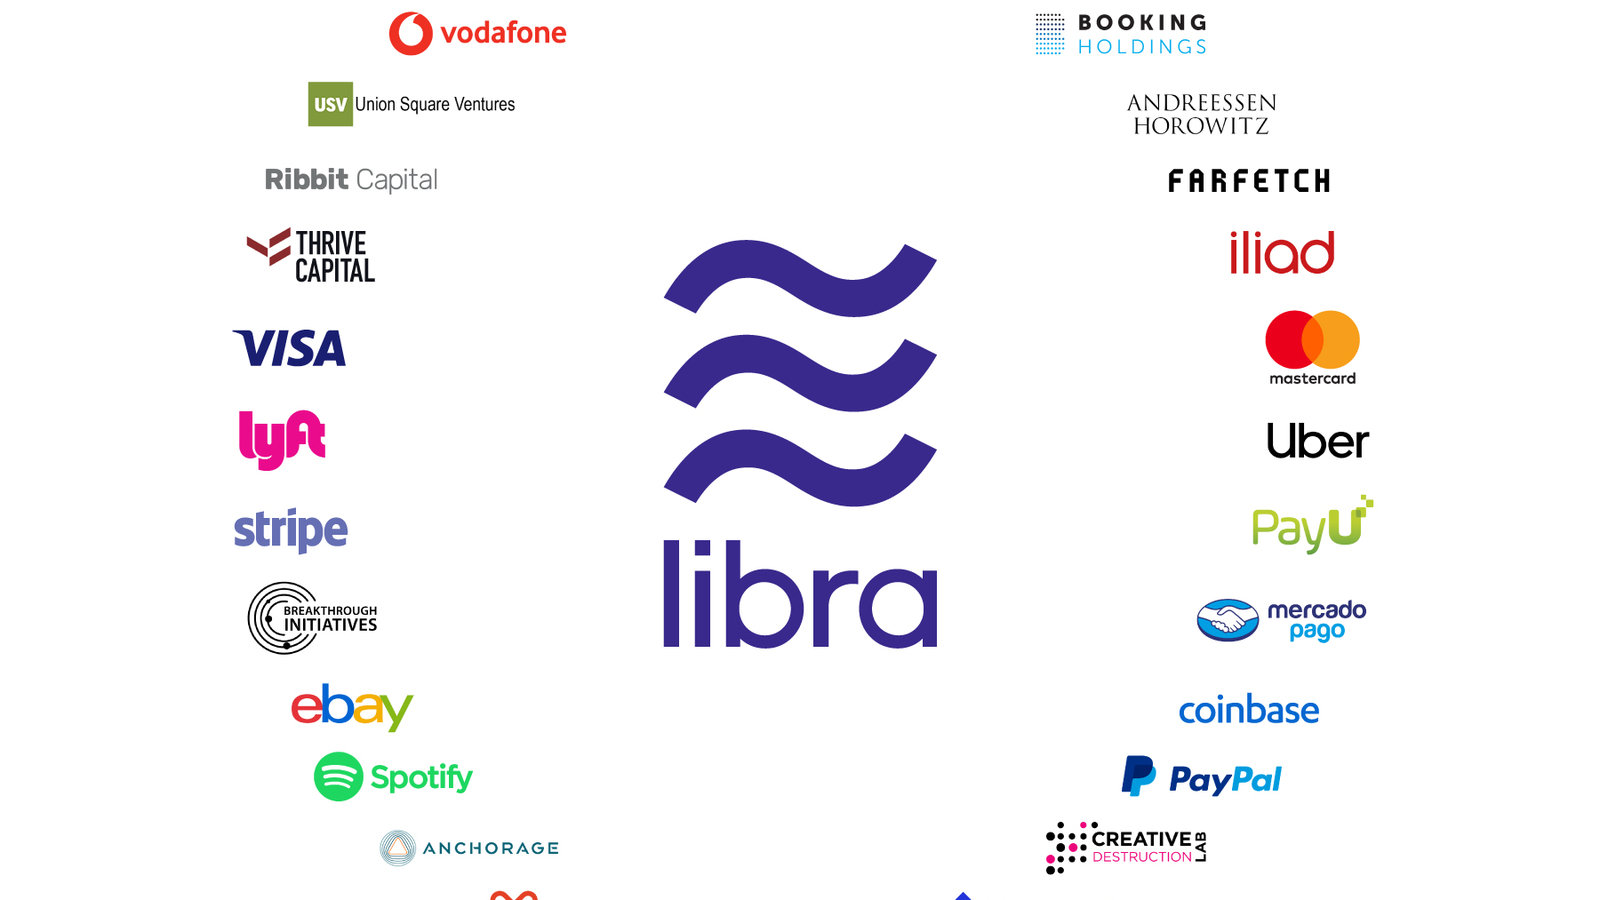 Facebook's Libra Coin: Everything about Libra cryptocurrency